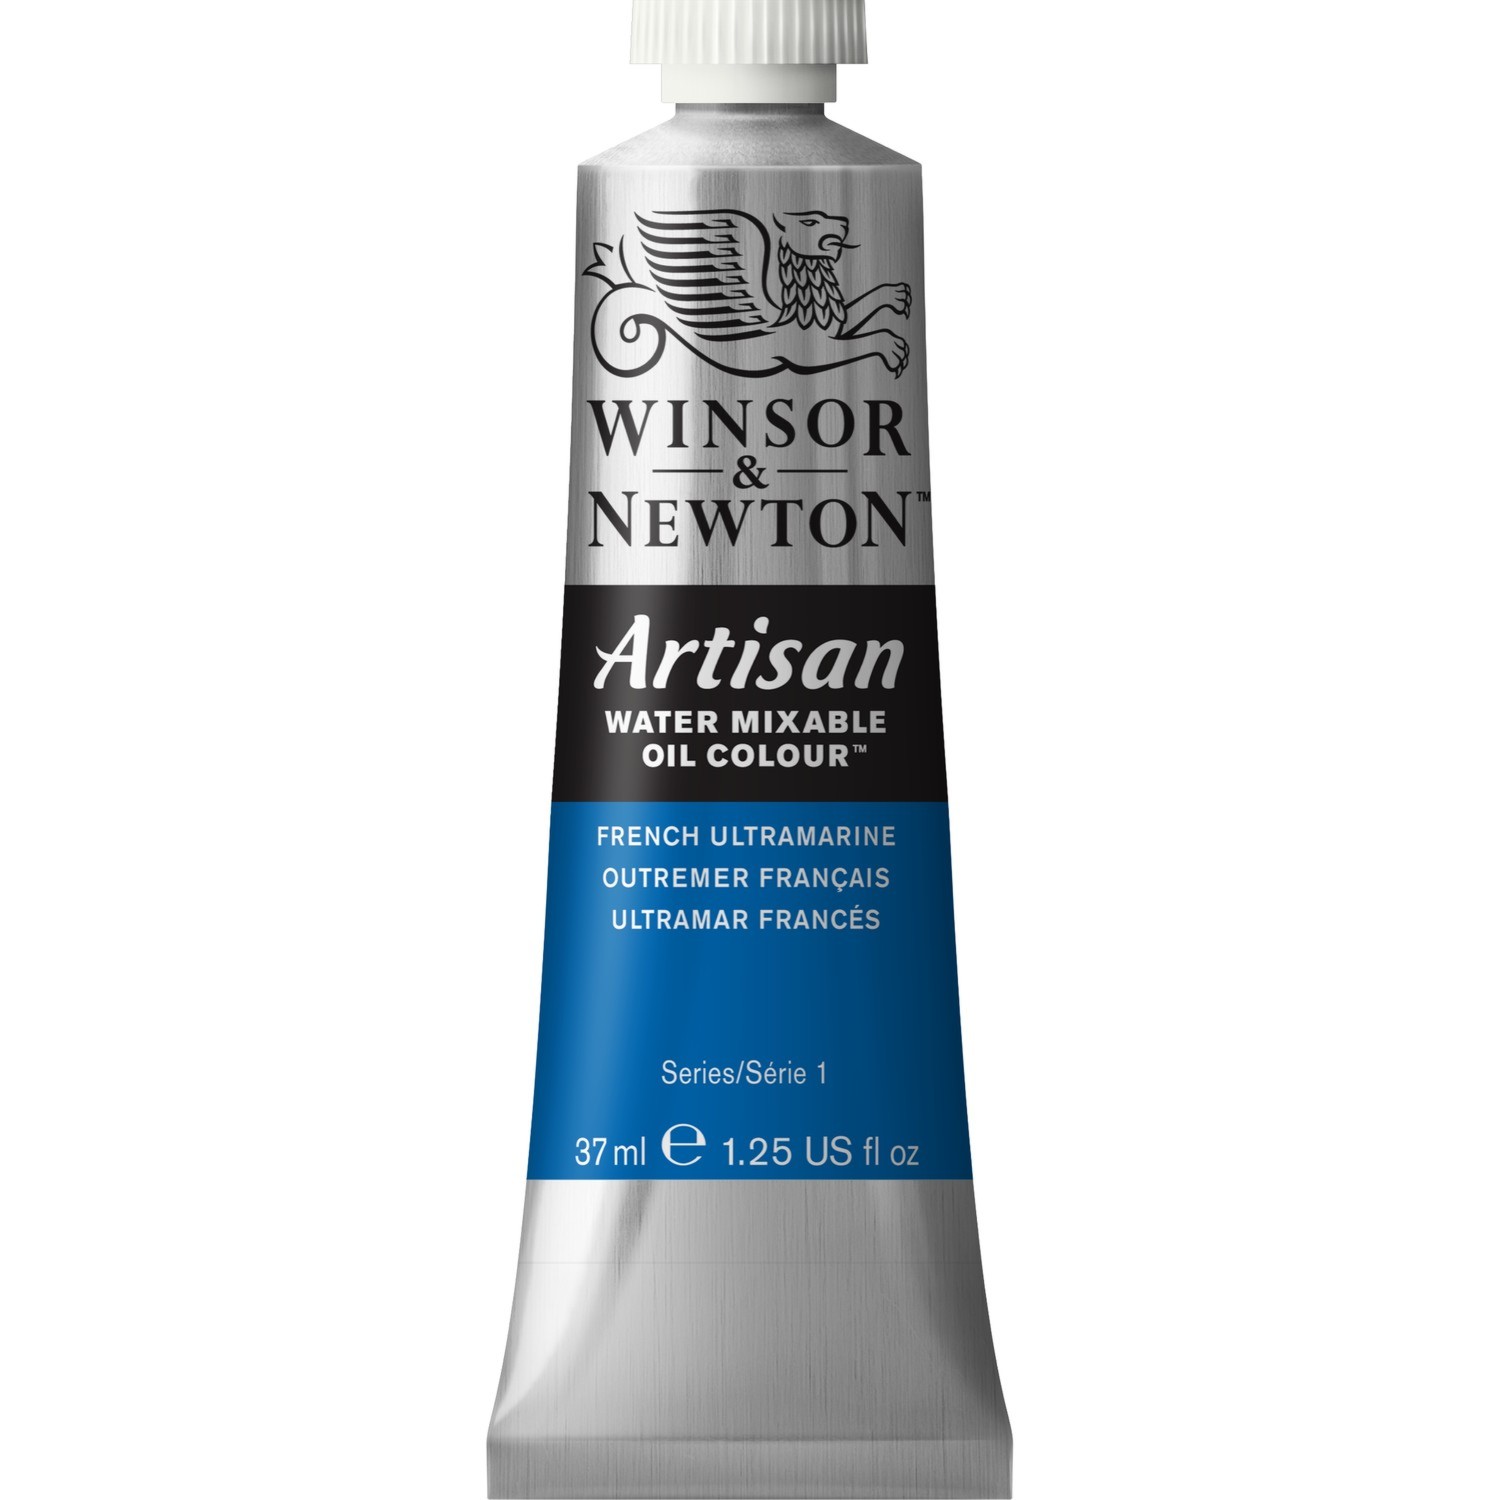 Winsor and Newton 37ml Artisan Mixable Oil Paint - French Ultramarine Image 1